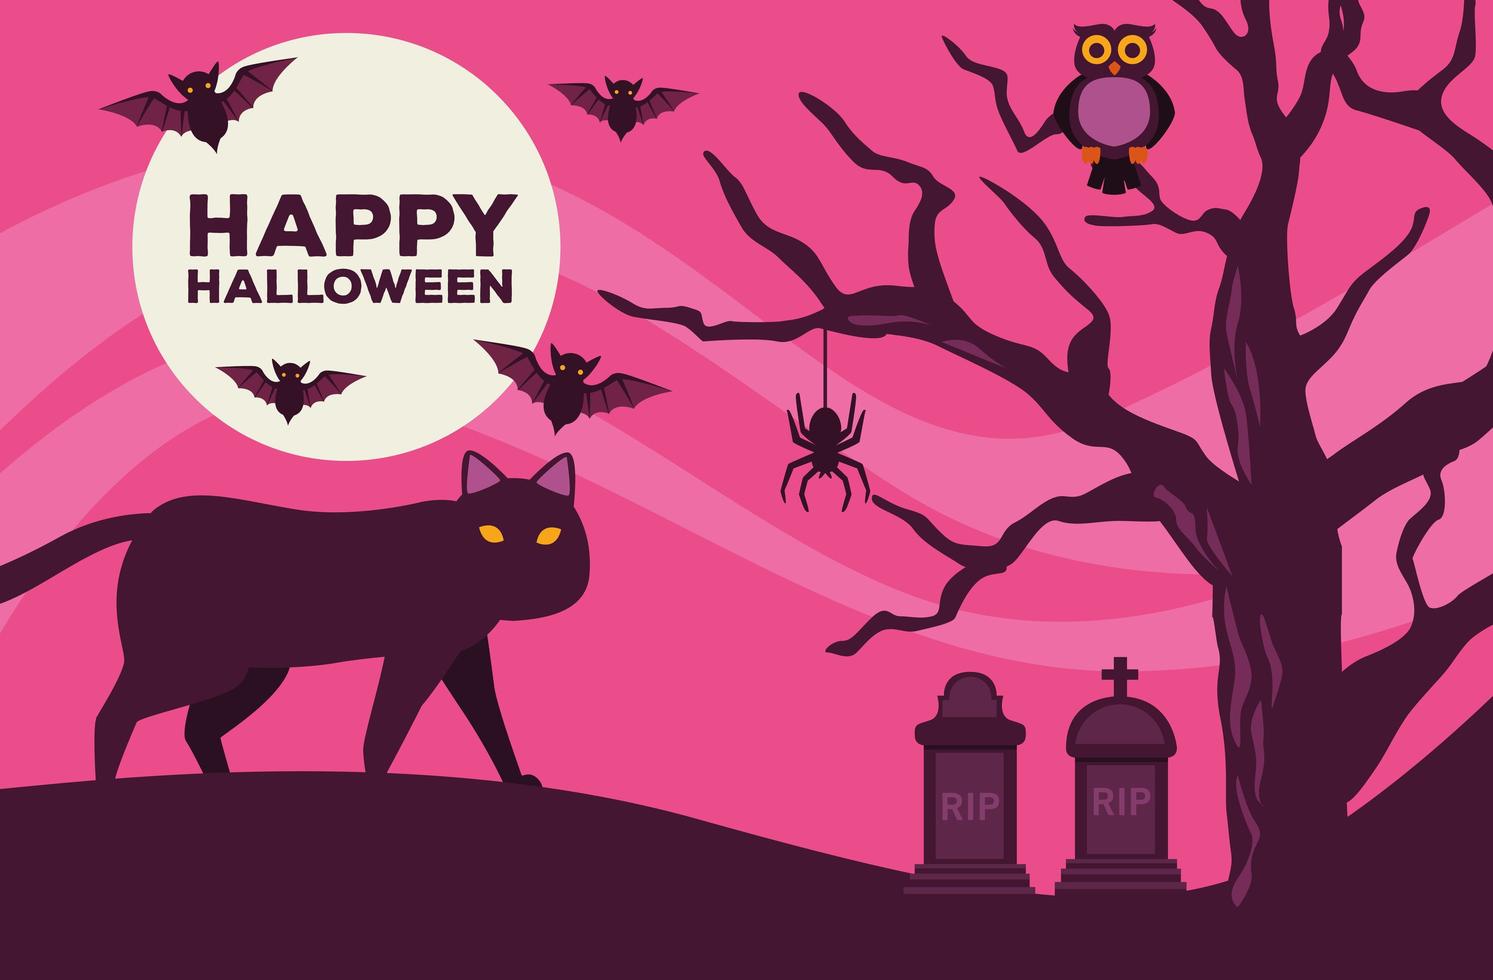 happy halloween celebration card with cat and bats in cemetery scene vector